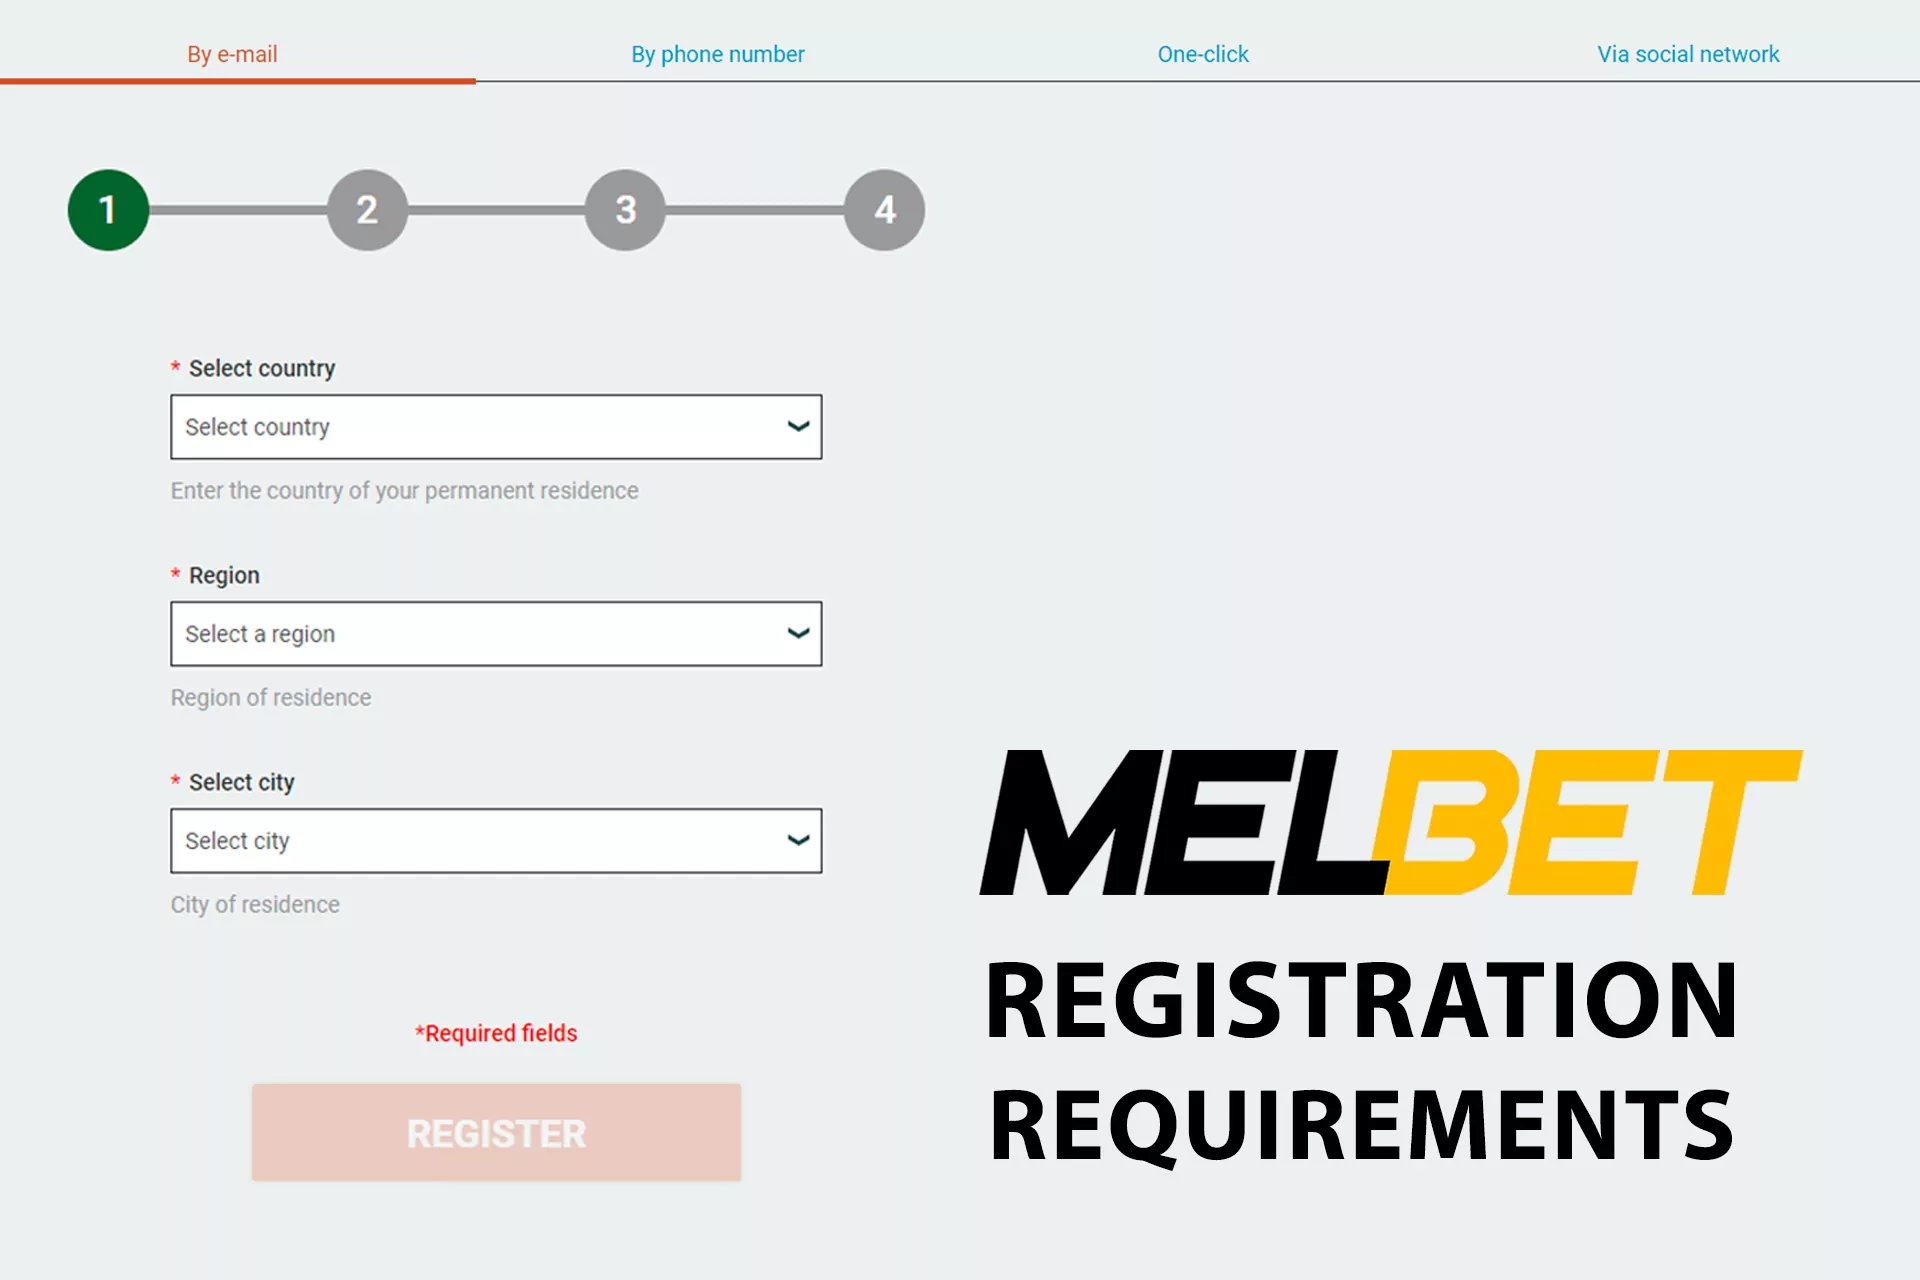 Follow the registration requirements not to be banned at Melbet.